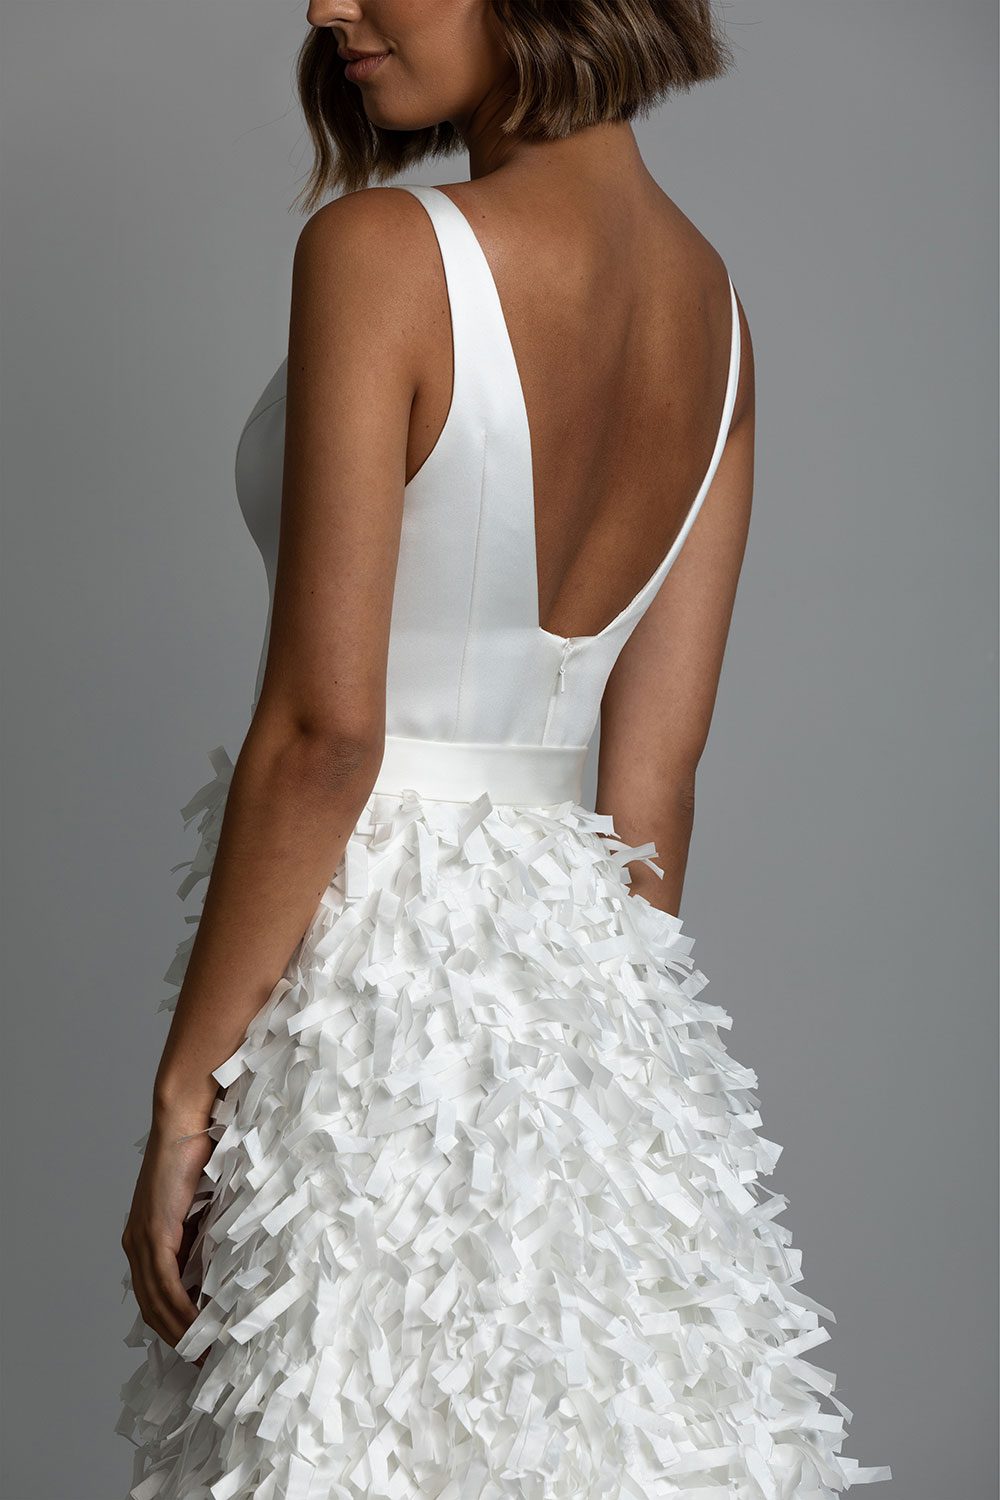 Bianca wedding dress from Vinka design. Close up view of squared back of the gown with satin belt and ribbon cut skirt